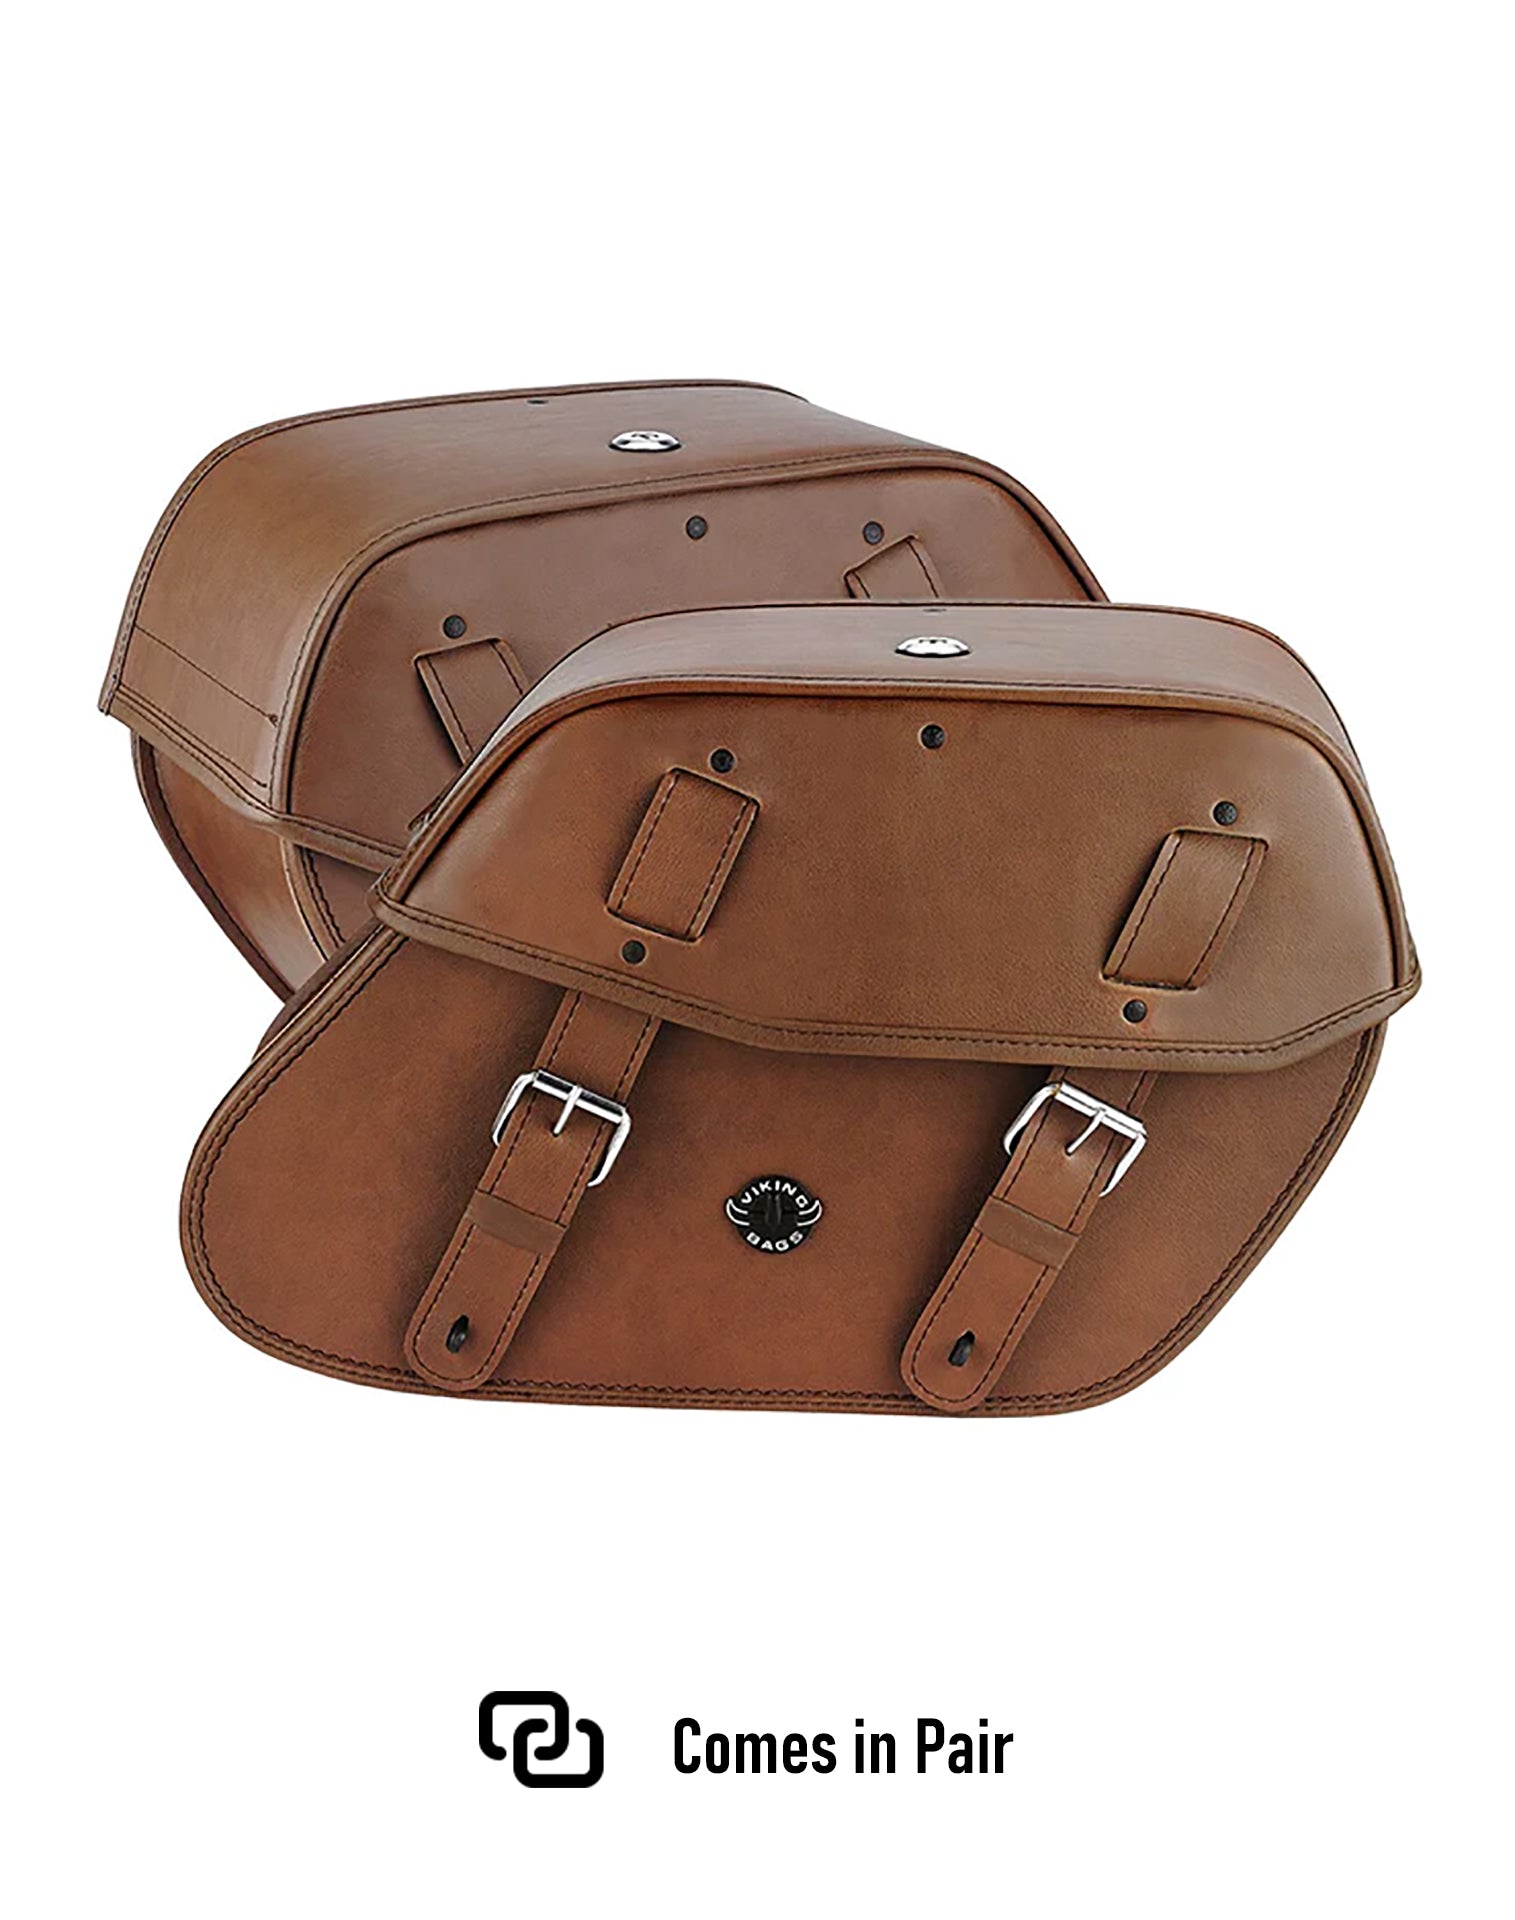 Viking Odin Brown Large Kawasaki Mean Streak 1500 Leather Motorcycle Saddlebags Weather Resistant Bags Comes in Pair